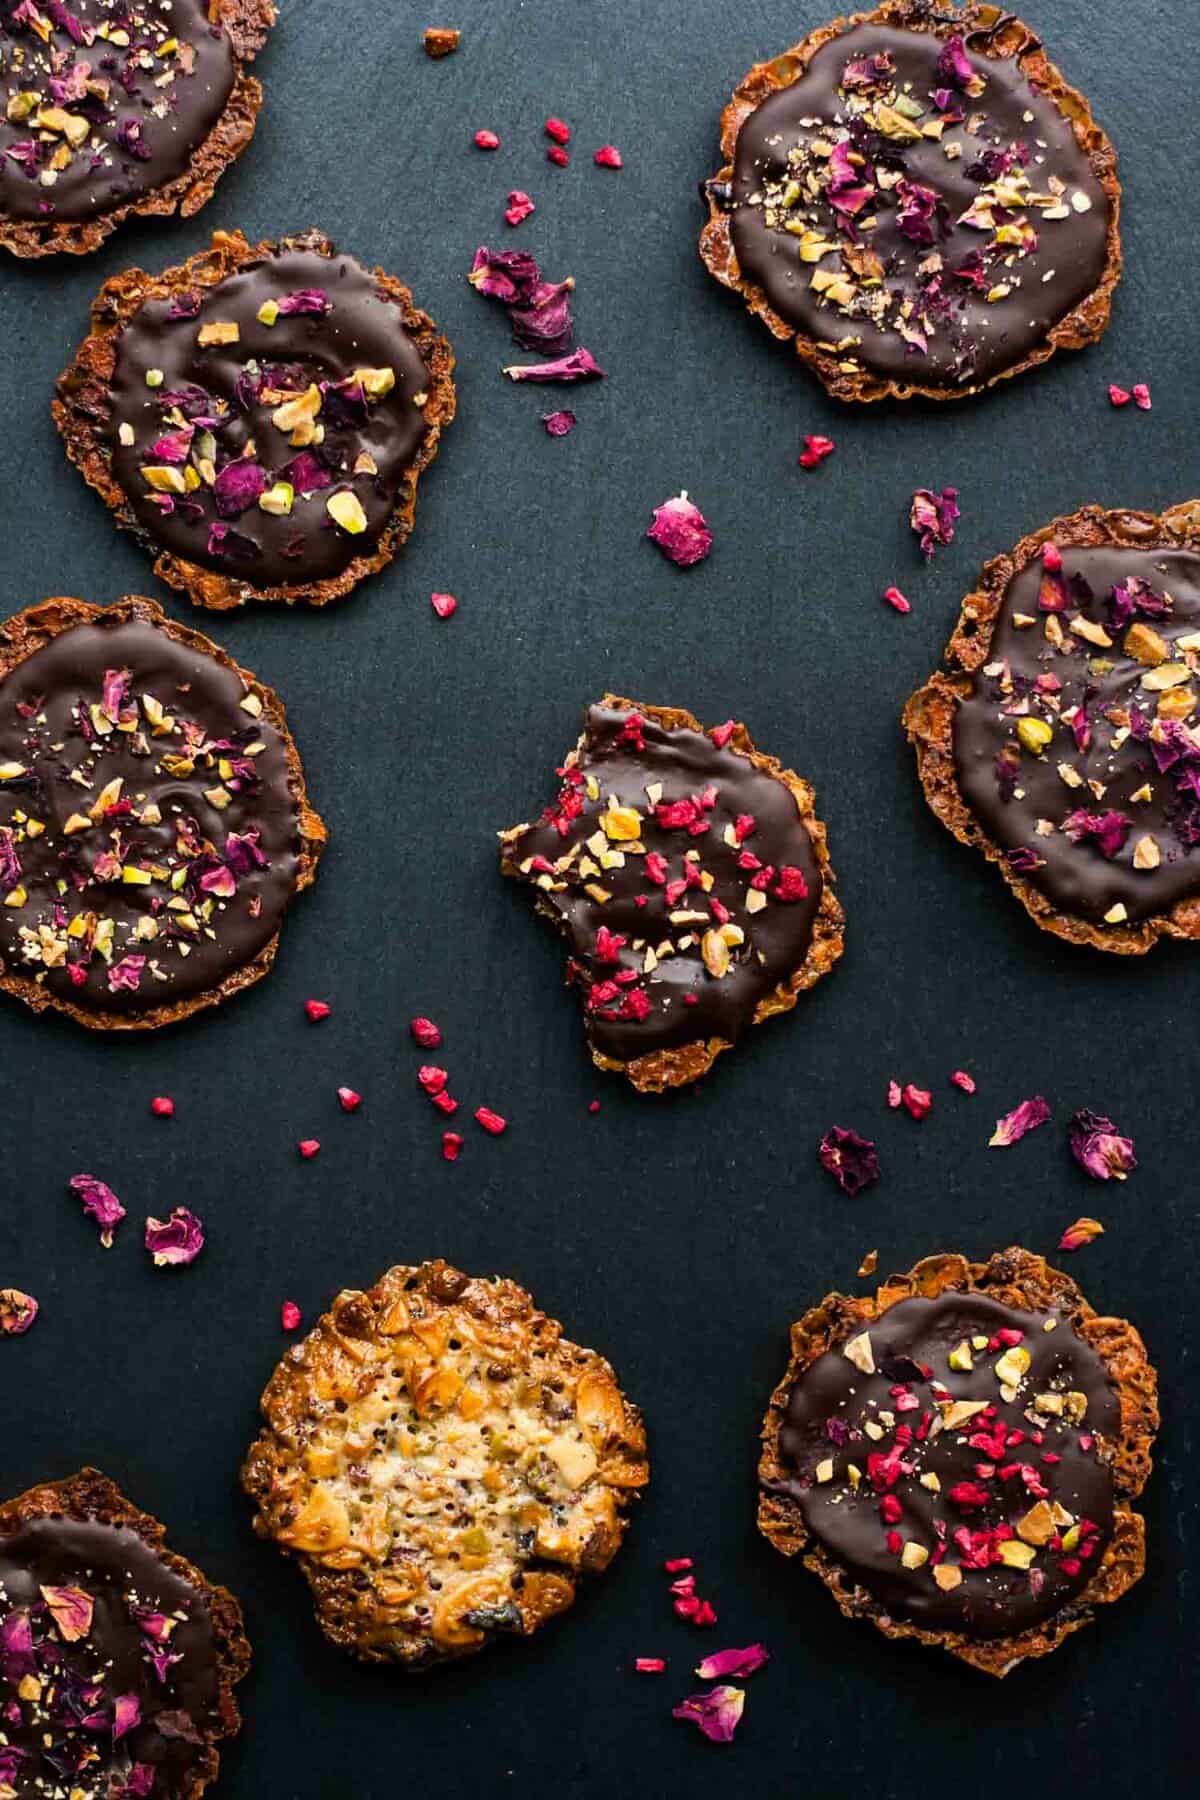 Raspberry Pistachio Almond Florentines - why not get baking and make these indulgent treats for Valentine's Day? | eatloveeats.com